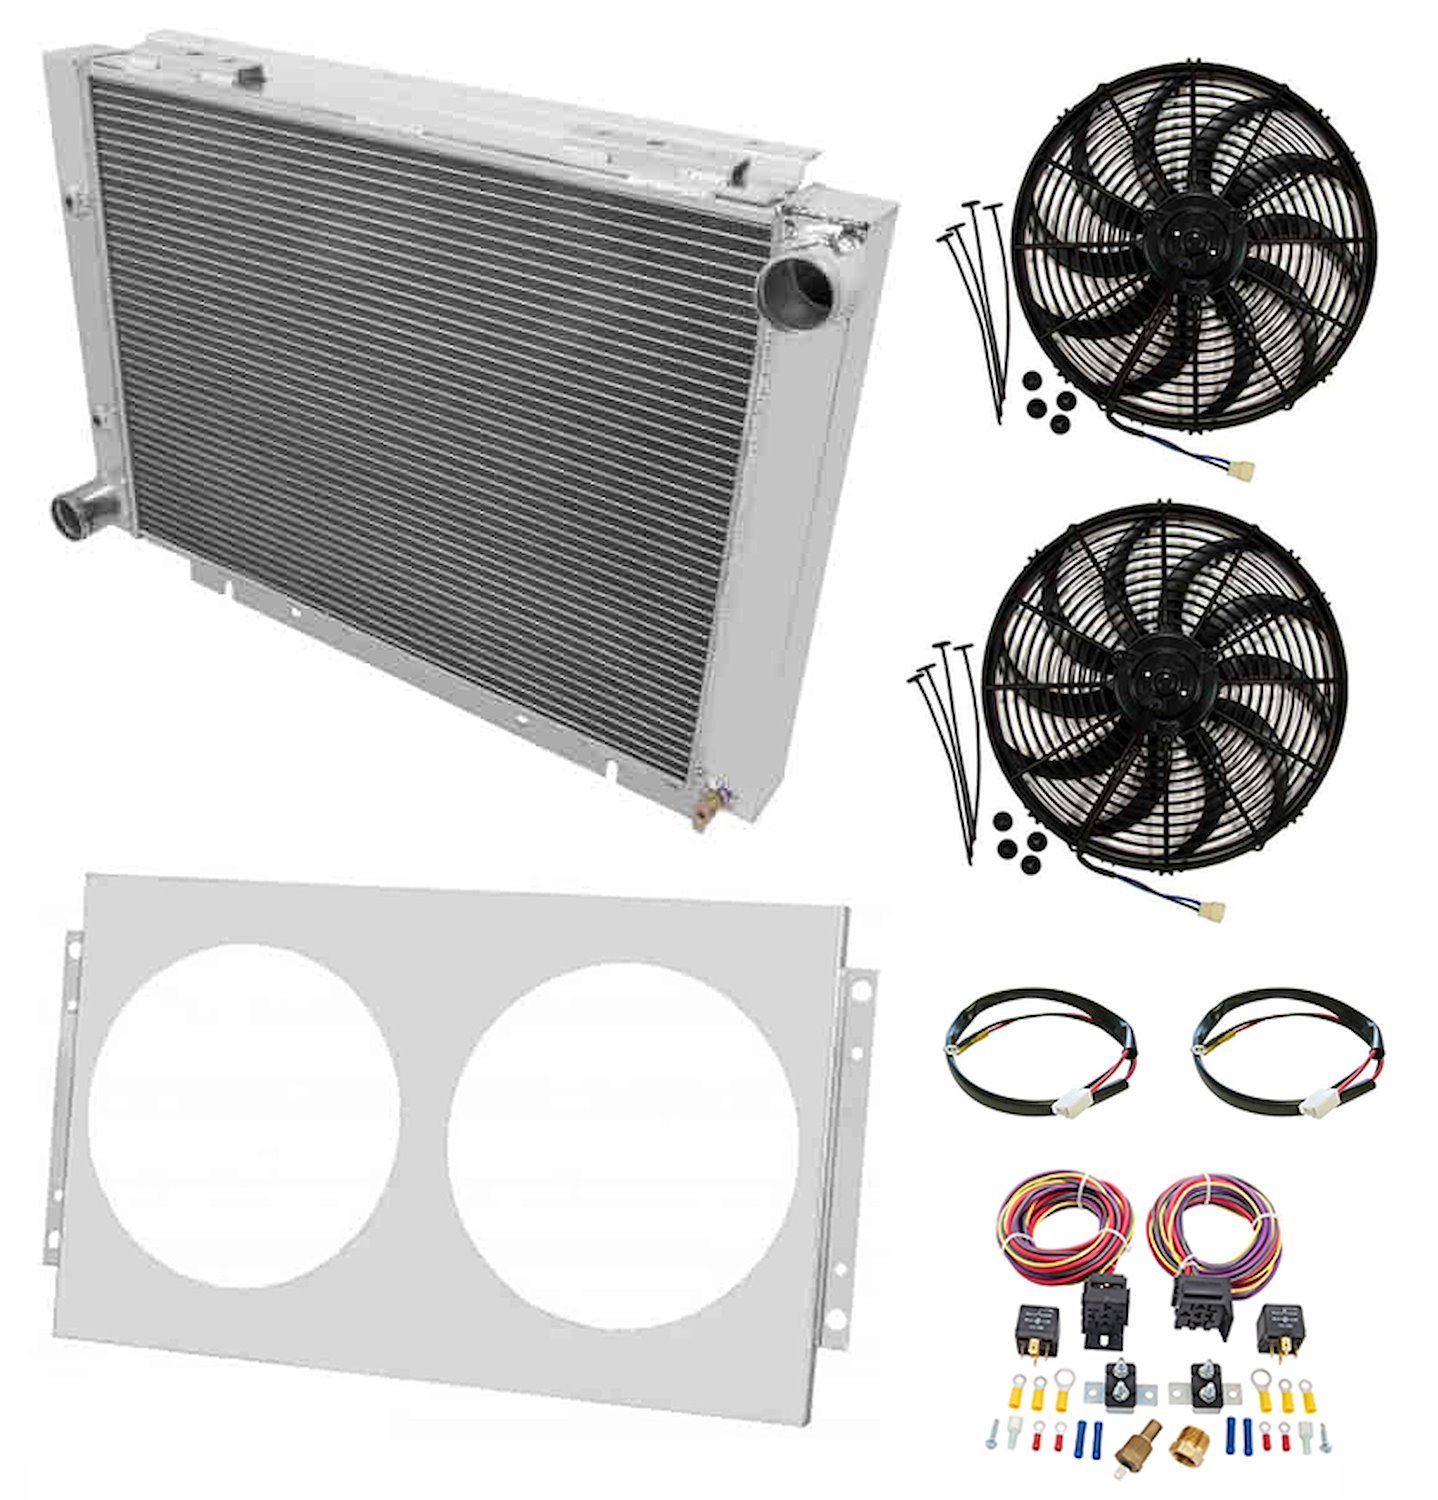 CC6063 All-Aluminum Radiator System Kit for 1960-1963 Ford Galaxie [Dual Fans]